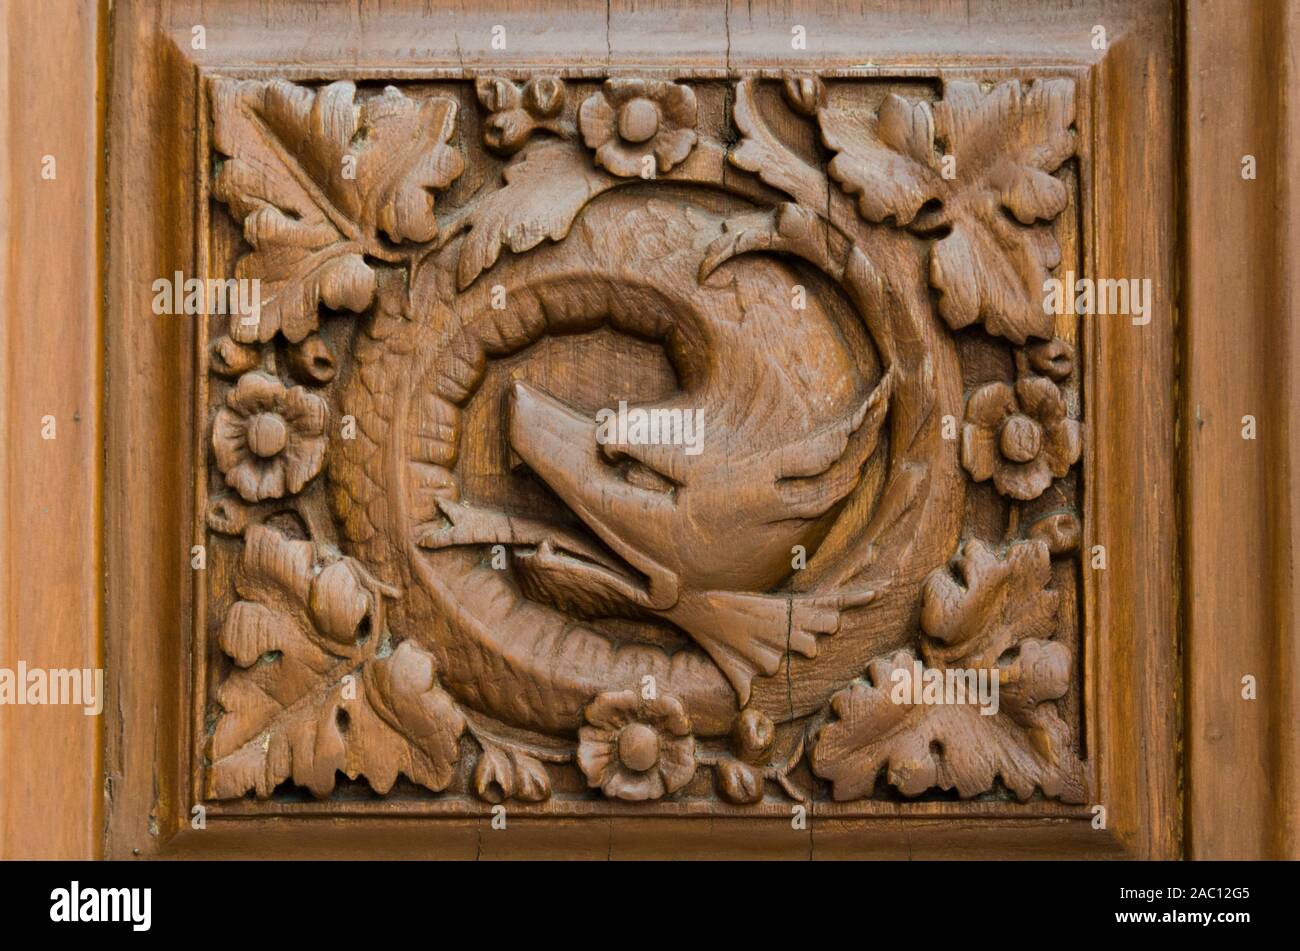 Mexico city / Mexico; May 21, 2014: wood carving representing Quetzalcoatl, the Mesoamerican feathered serpent, detail of a door of Chapultepec Castle Stock Photo